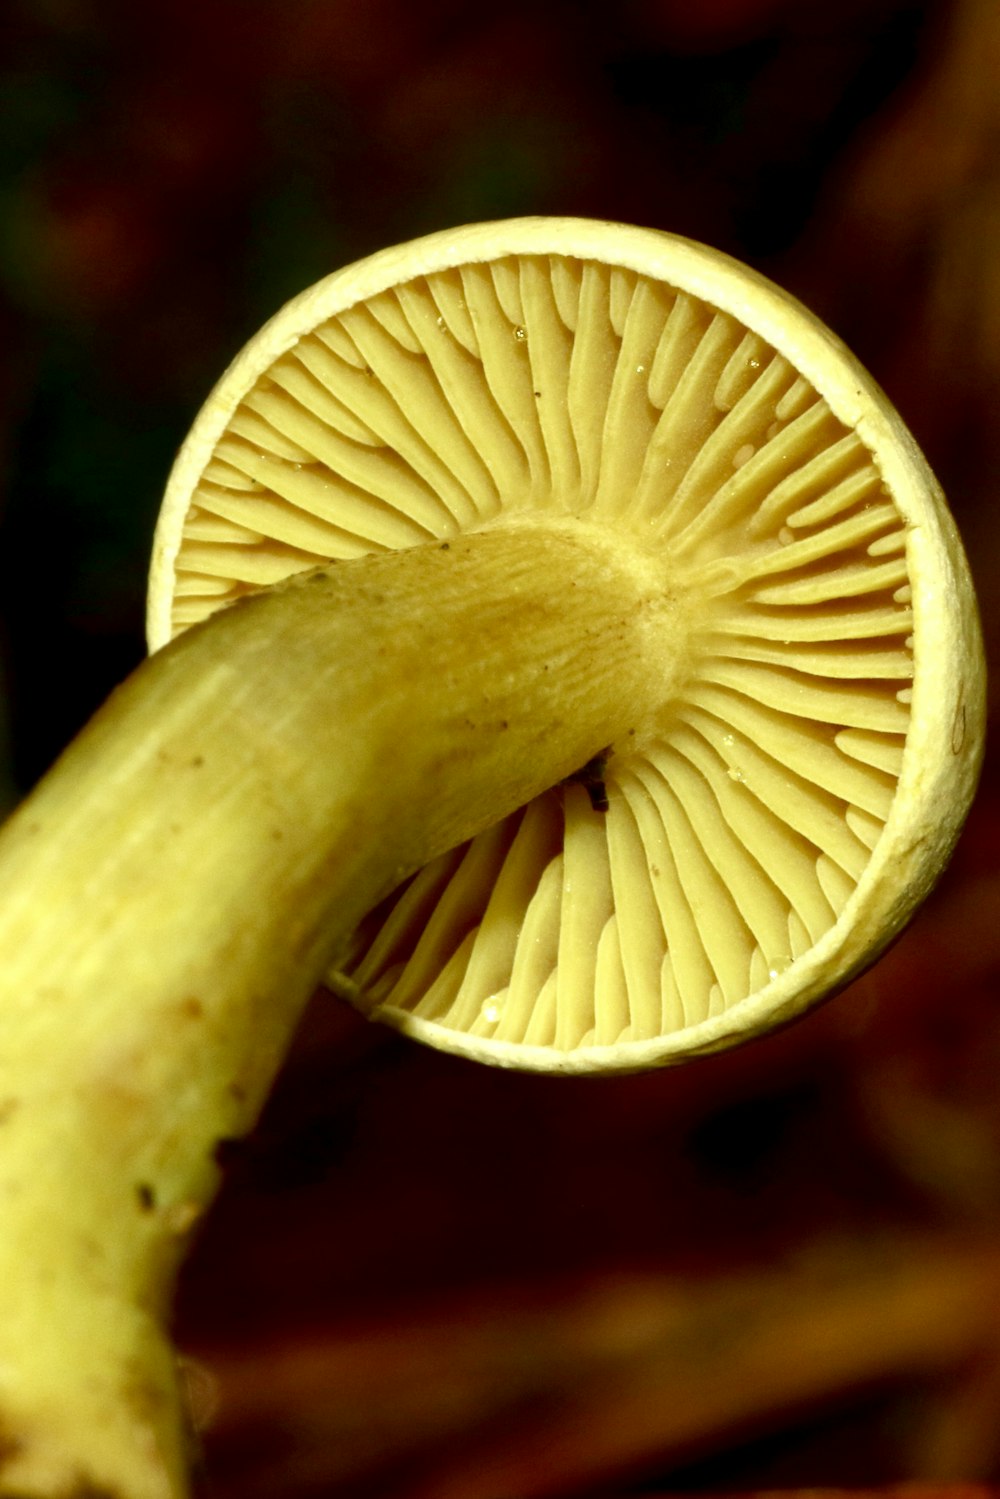 white mushroom in close up photography